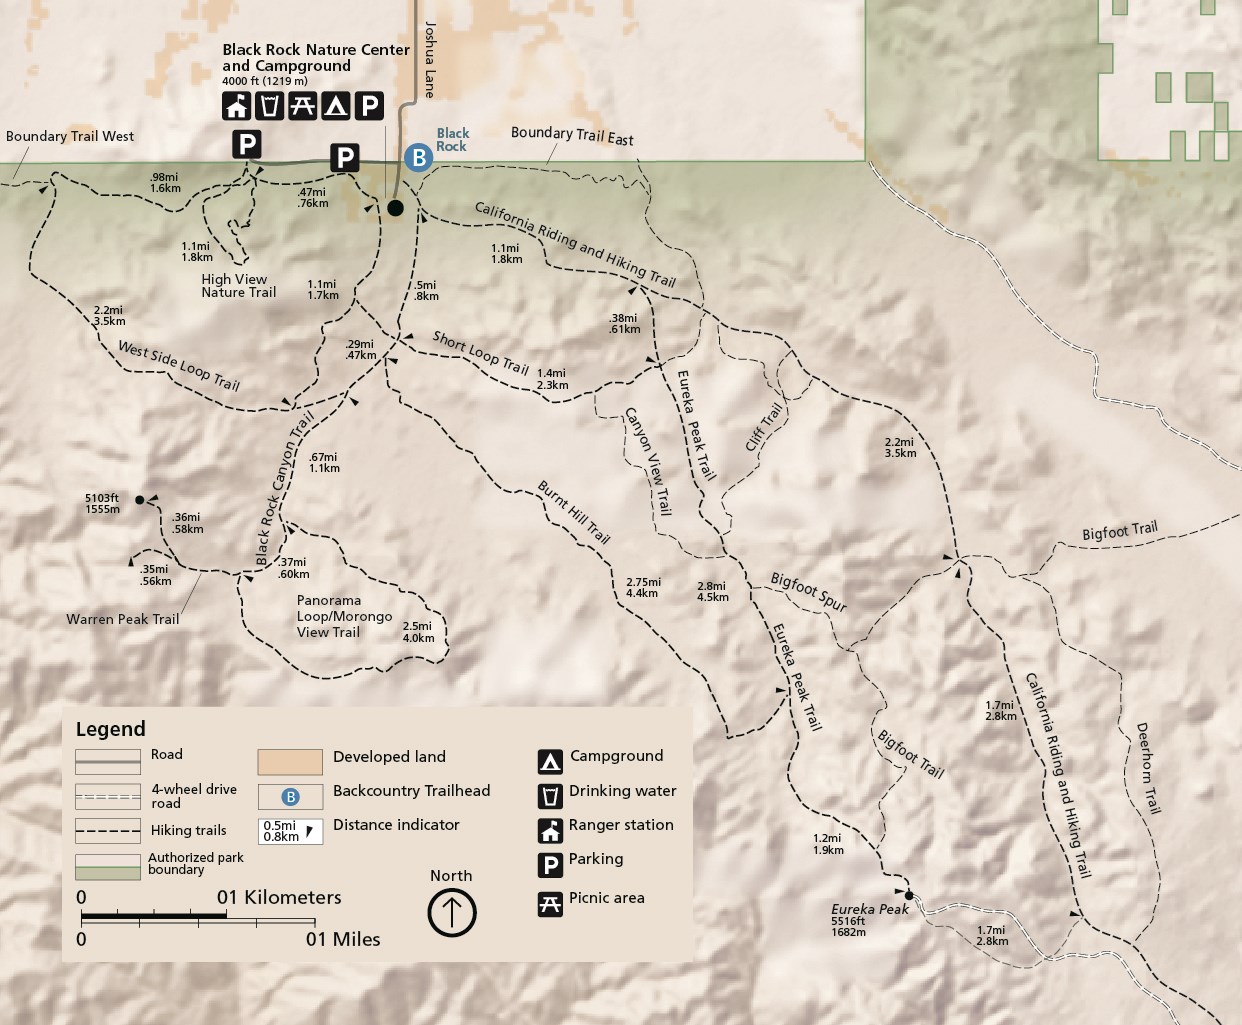 A map of the hiking trails in the Black Rock area of Joshua Tree National Park. West Side Loop, High View, Waren Peak, Burnt Hill, Short Loop, and Panorama Loop/Morongo View trails are recommended.